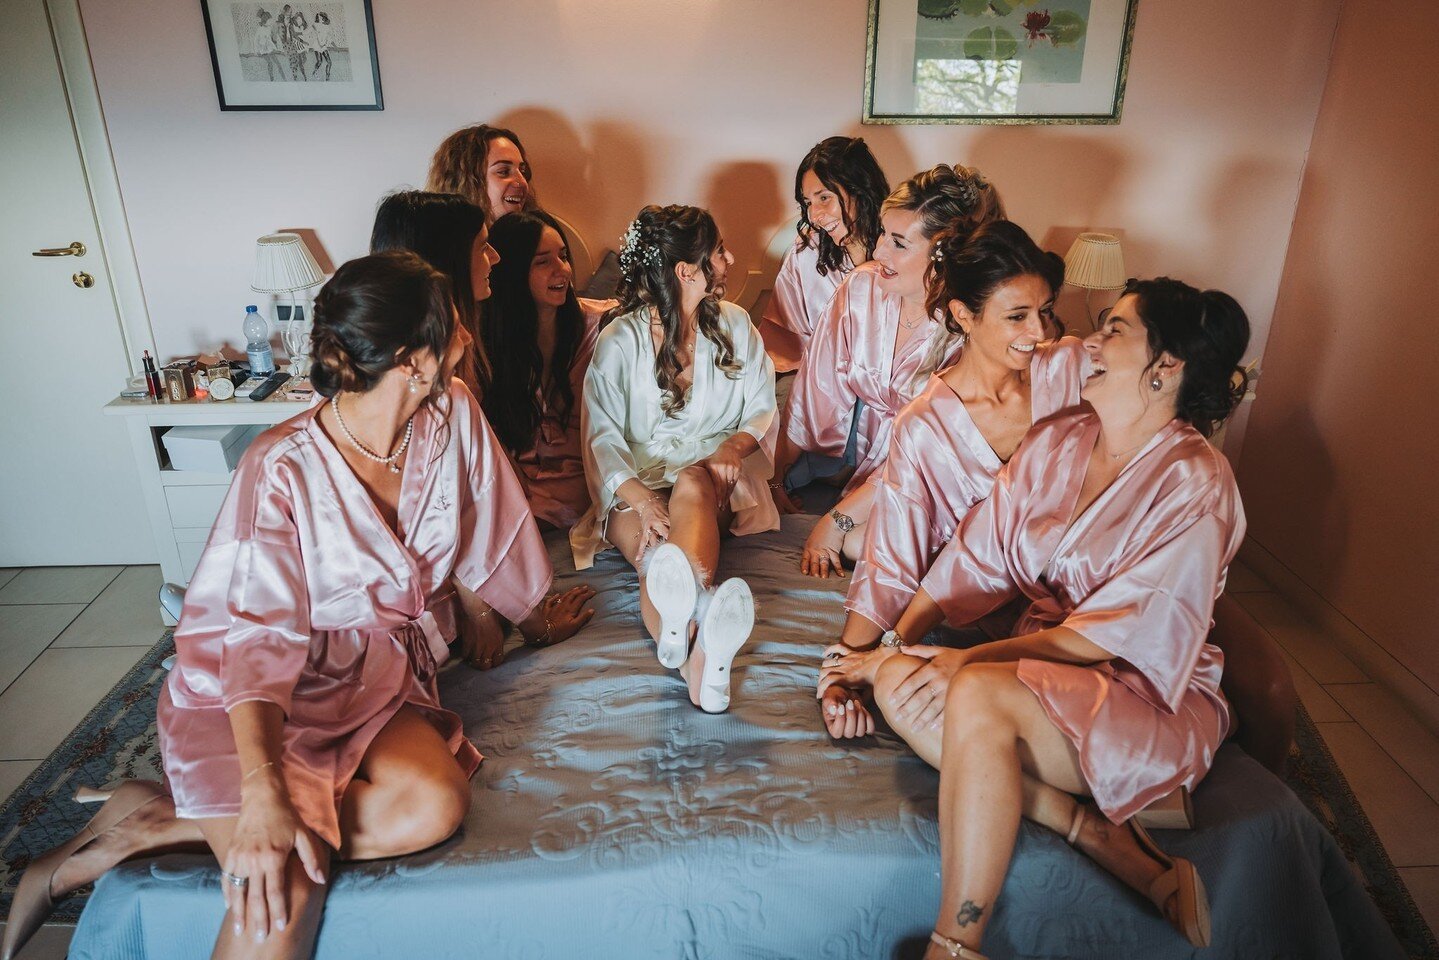 Behind-the-scenes magic! Join the journey from makeup brushes to bridal bliss. Capturing the laughter, anticipation, and quiet moments before &quot;I do.&quot; ⁠
⁠
https://www.digitalsposi.com⁠
⁠
⁠